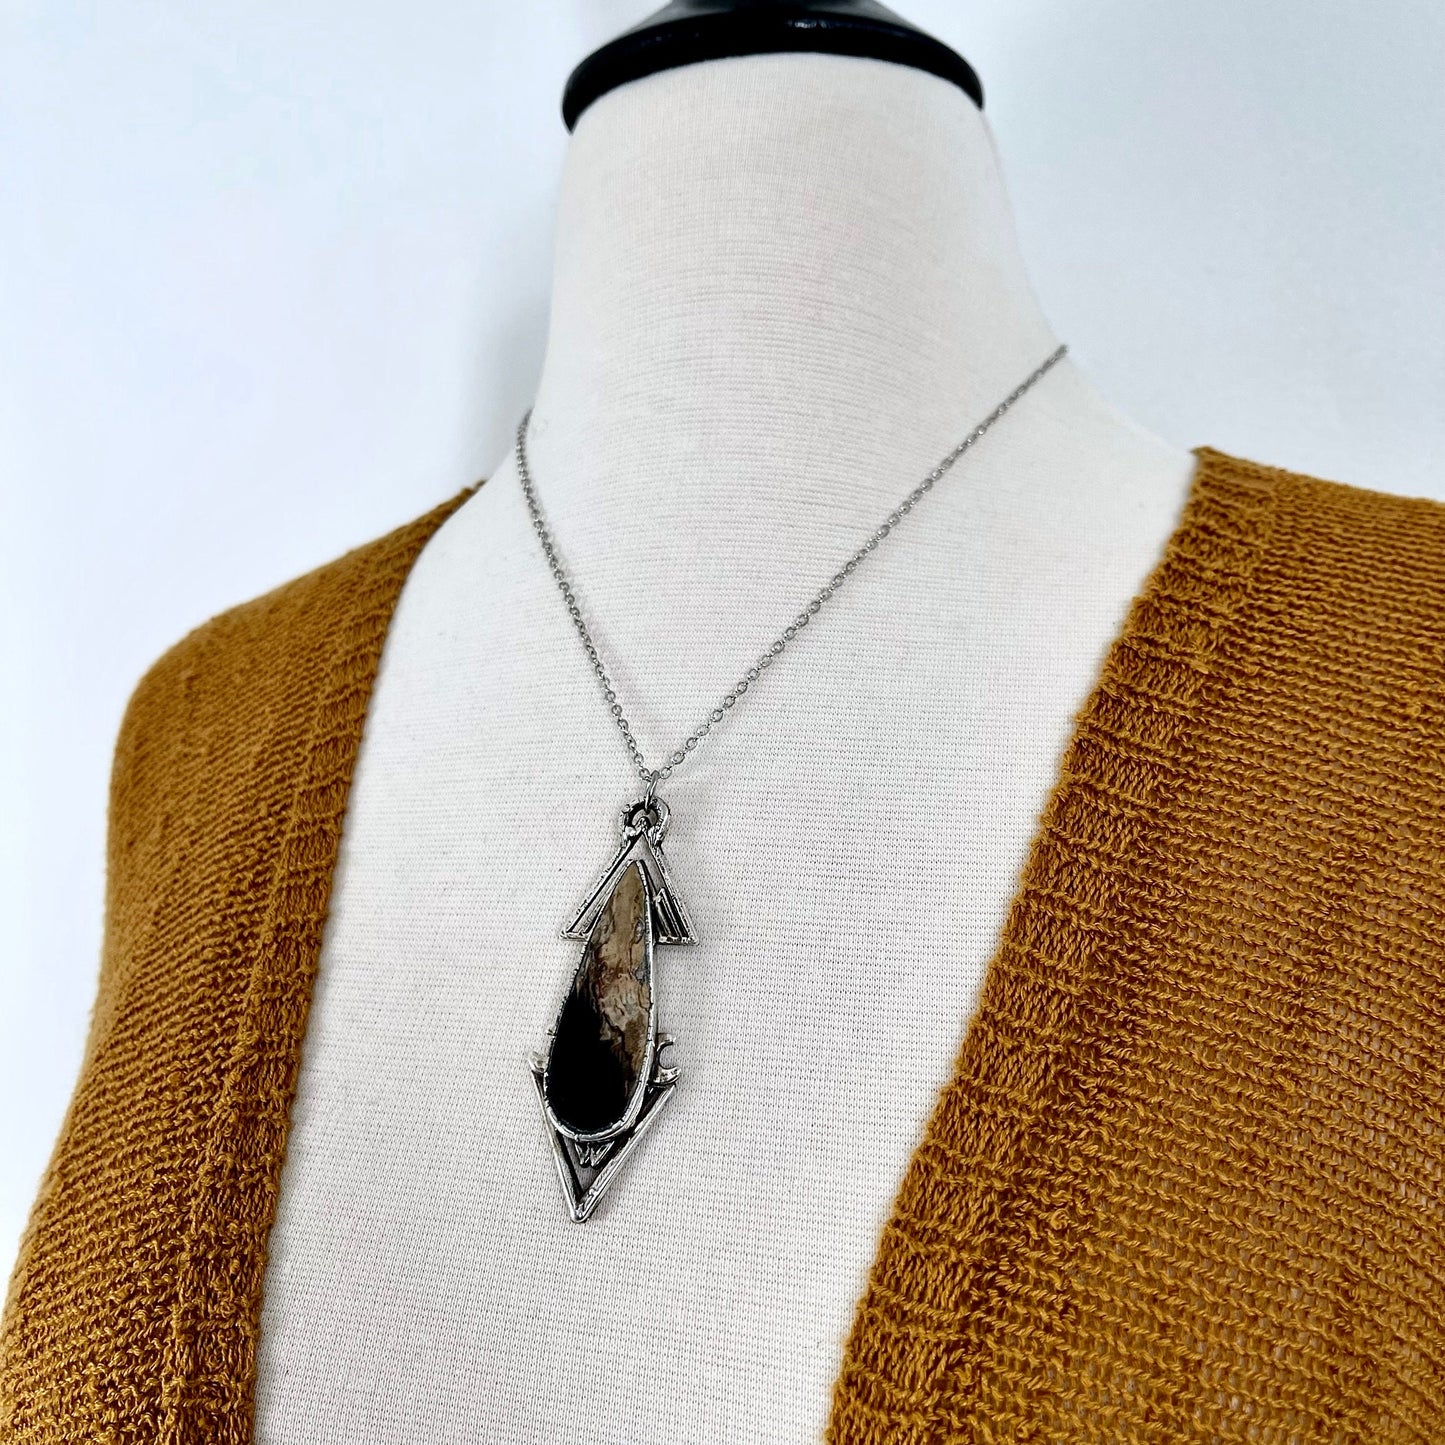 Moss & Moon Collection - Big Fossilized Palm Root Statement Necklace set in Fine Silver / One of a Kind - by Foxlark / Gothic Jewelry